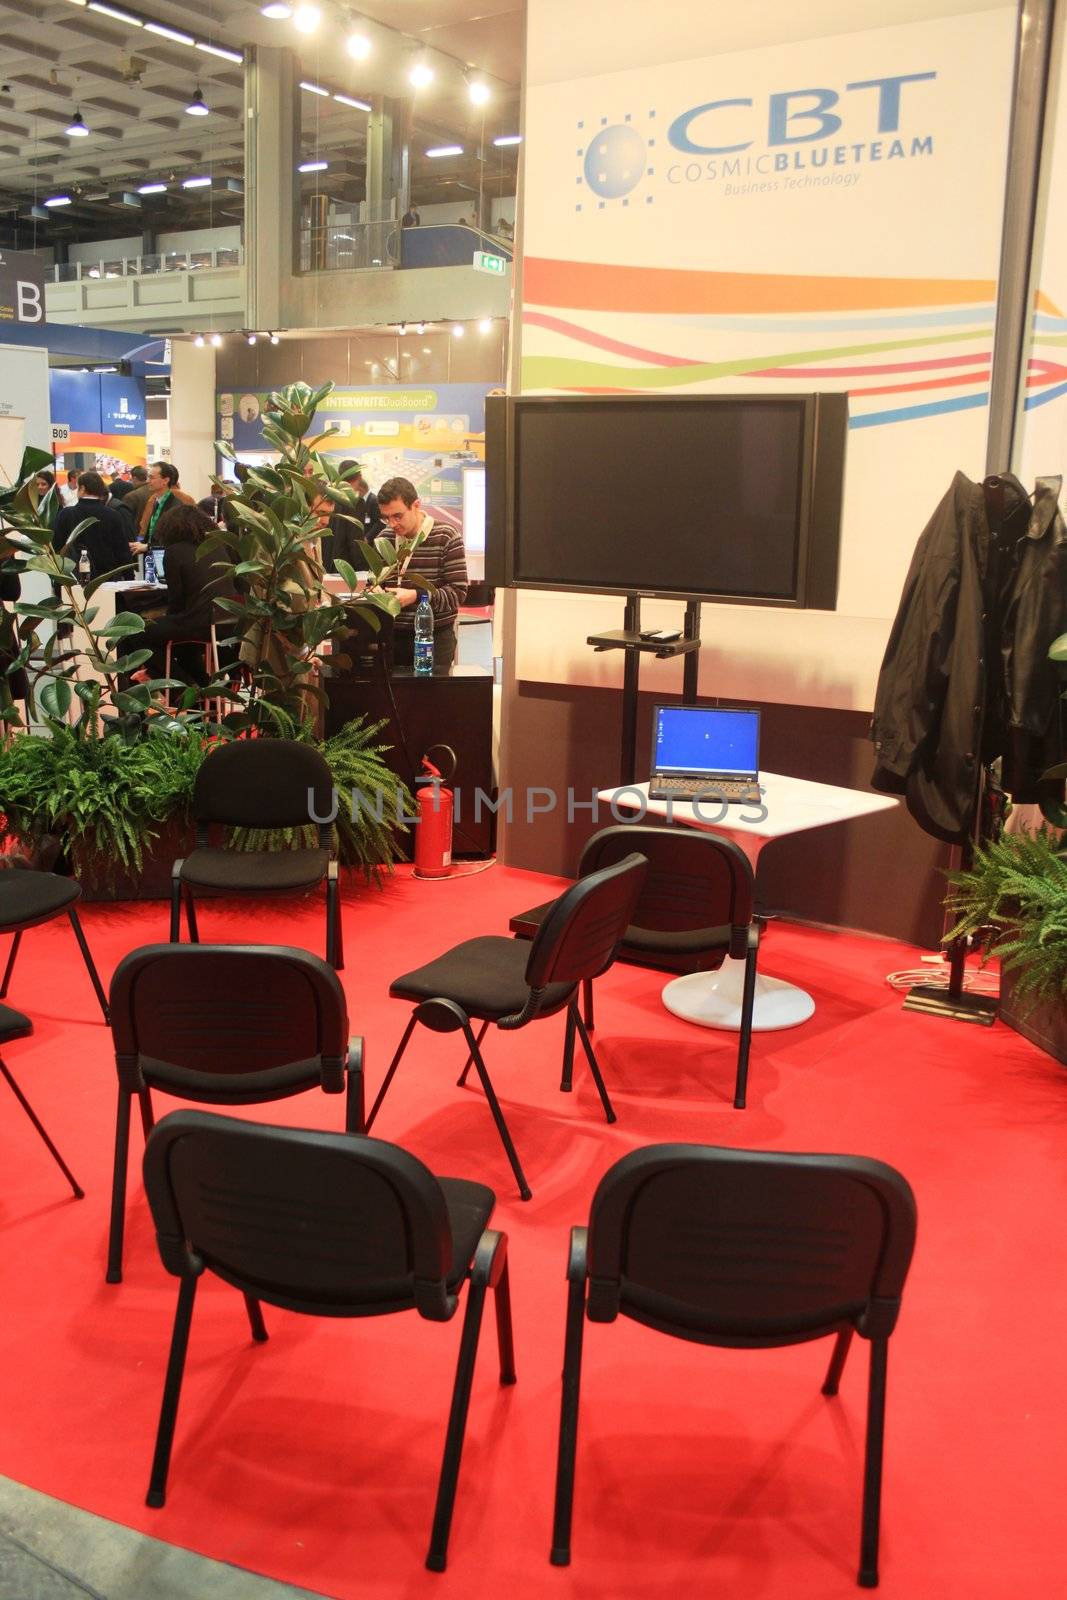 Meeting area area at Smau, national fair of business intelligence and information technology October 21, 2009 in Milan, Italy.